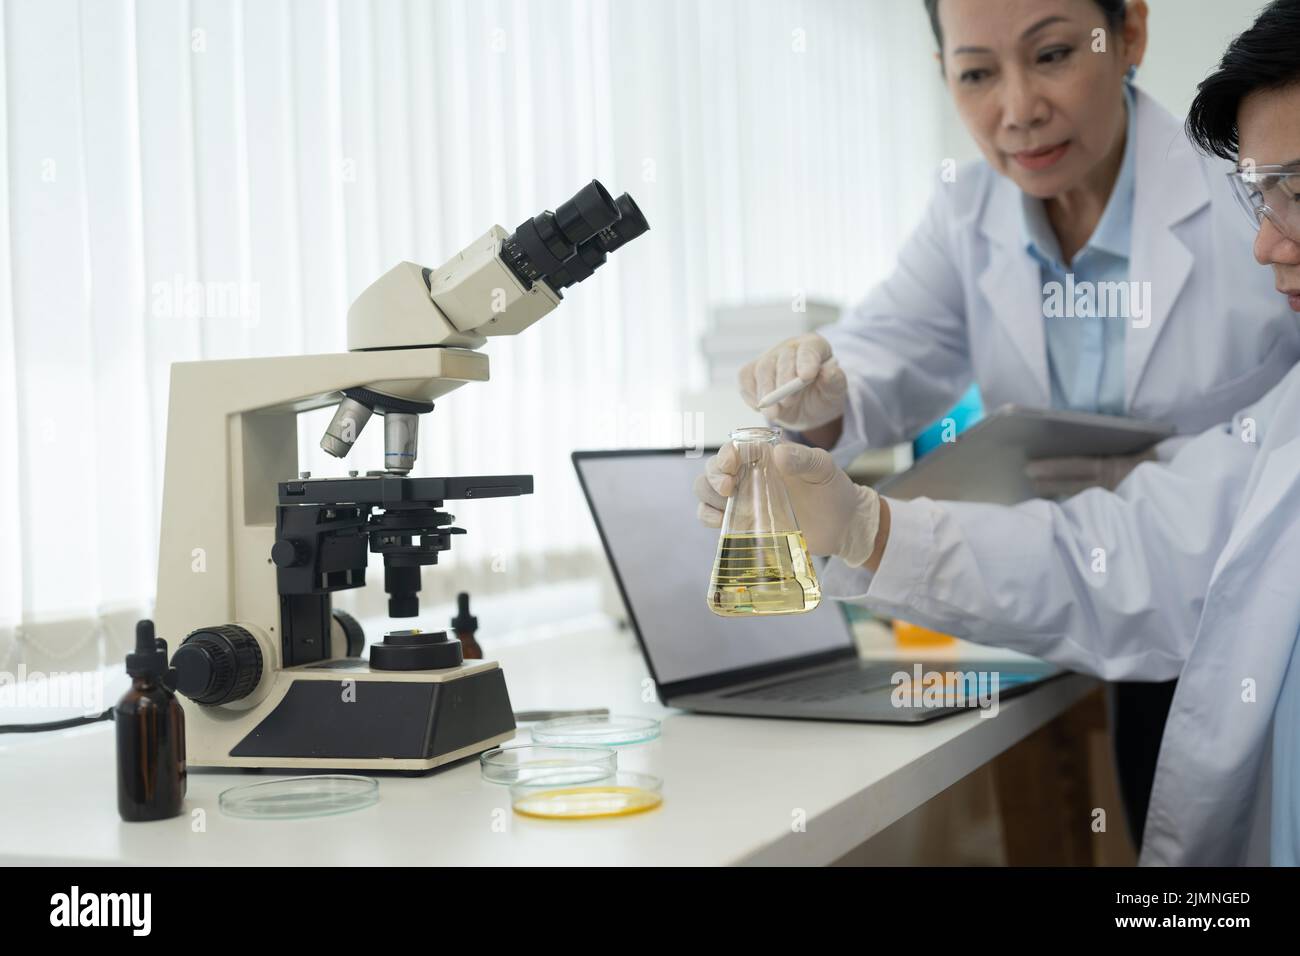 Science Oil Chemistry Expertise is Experiment Analysis With Microscope Equipment in Laboratory. Double Exposure of Scientist Chemical Research Testing Stock Photo